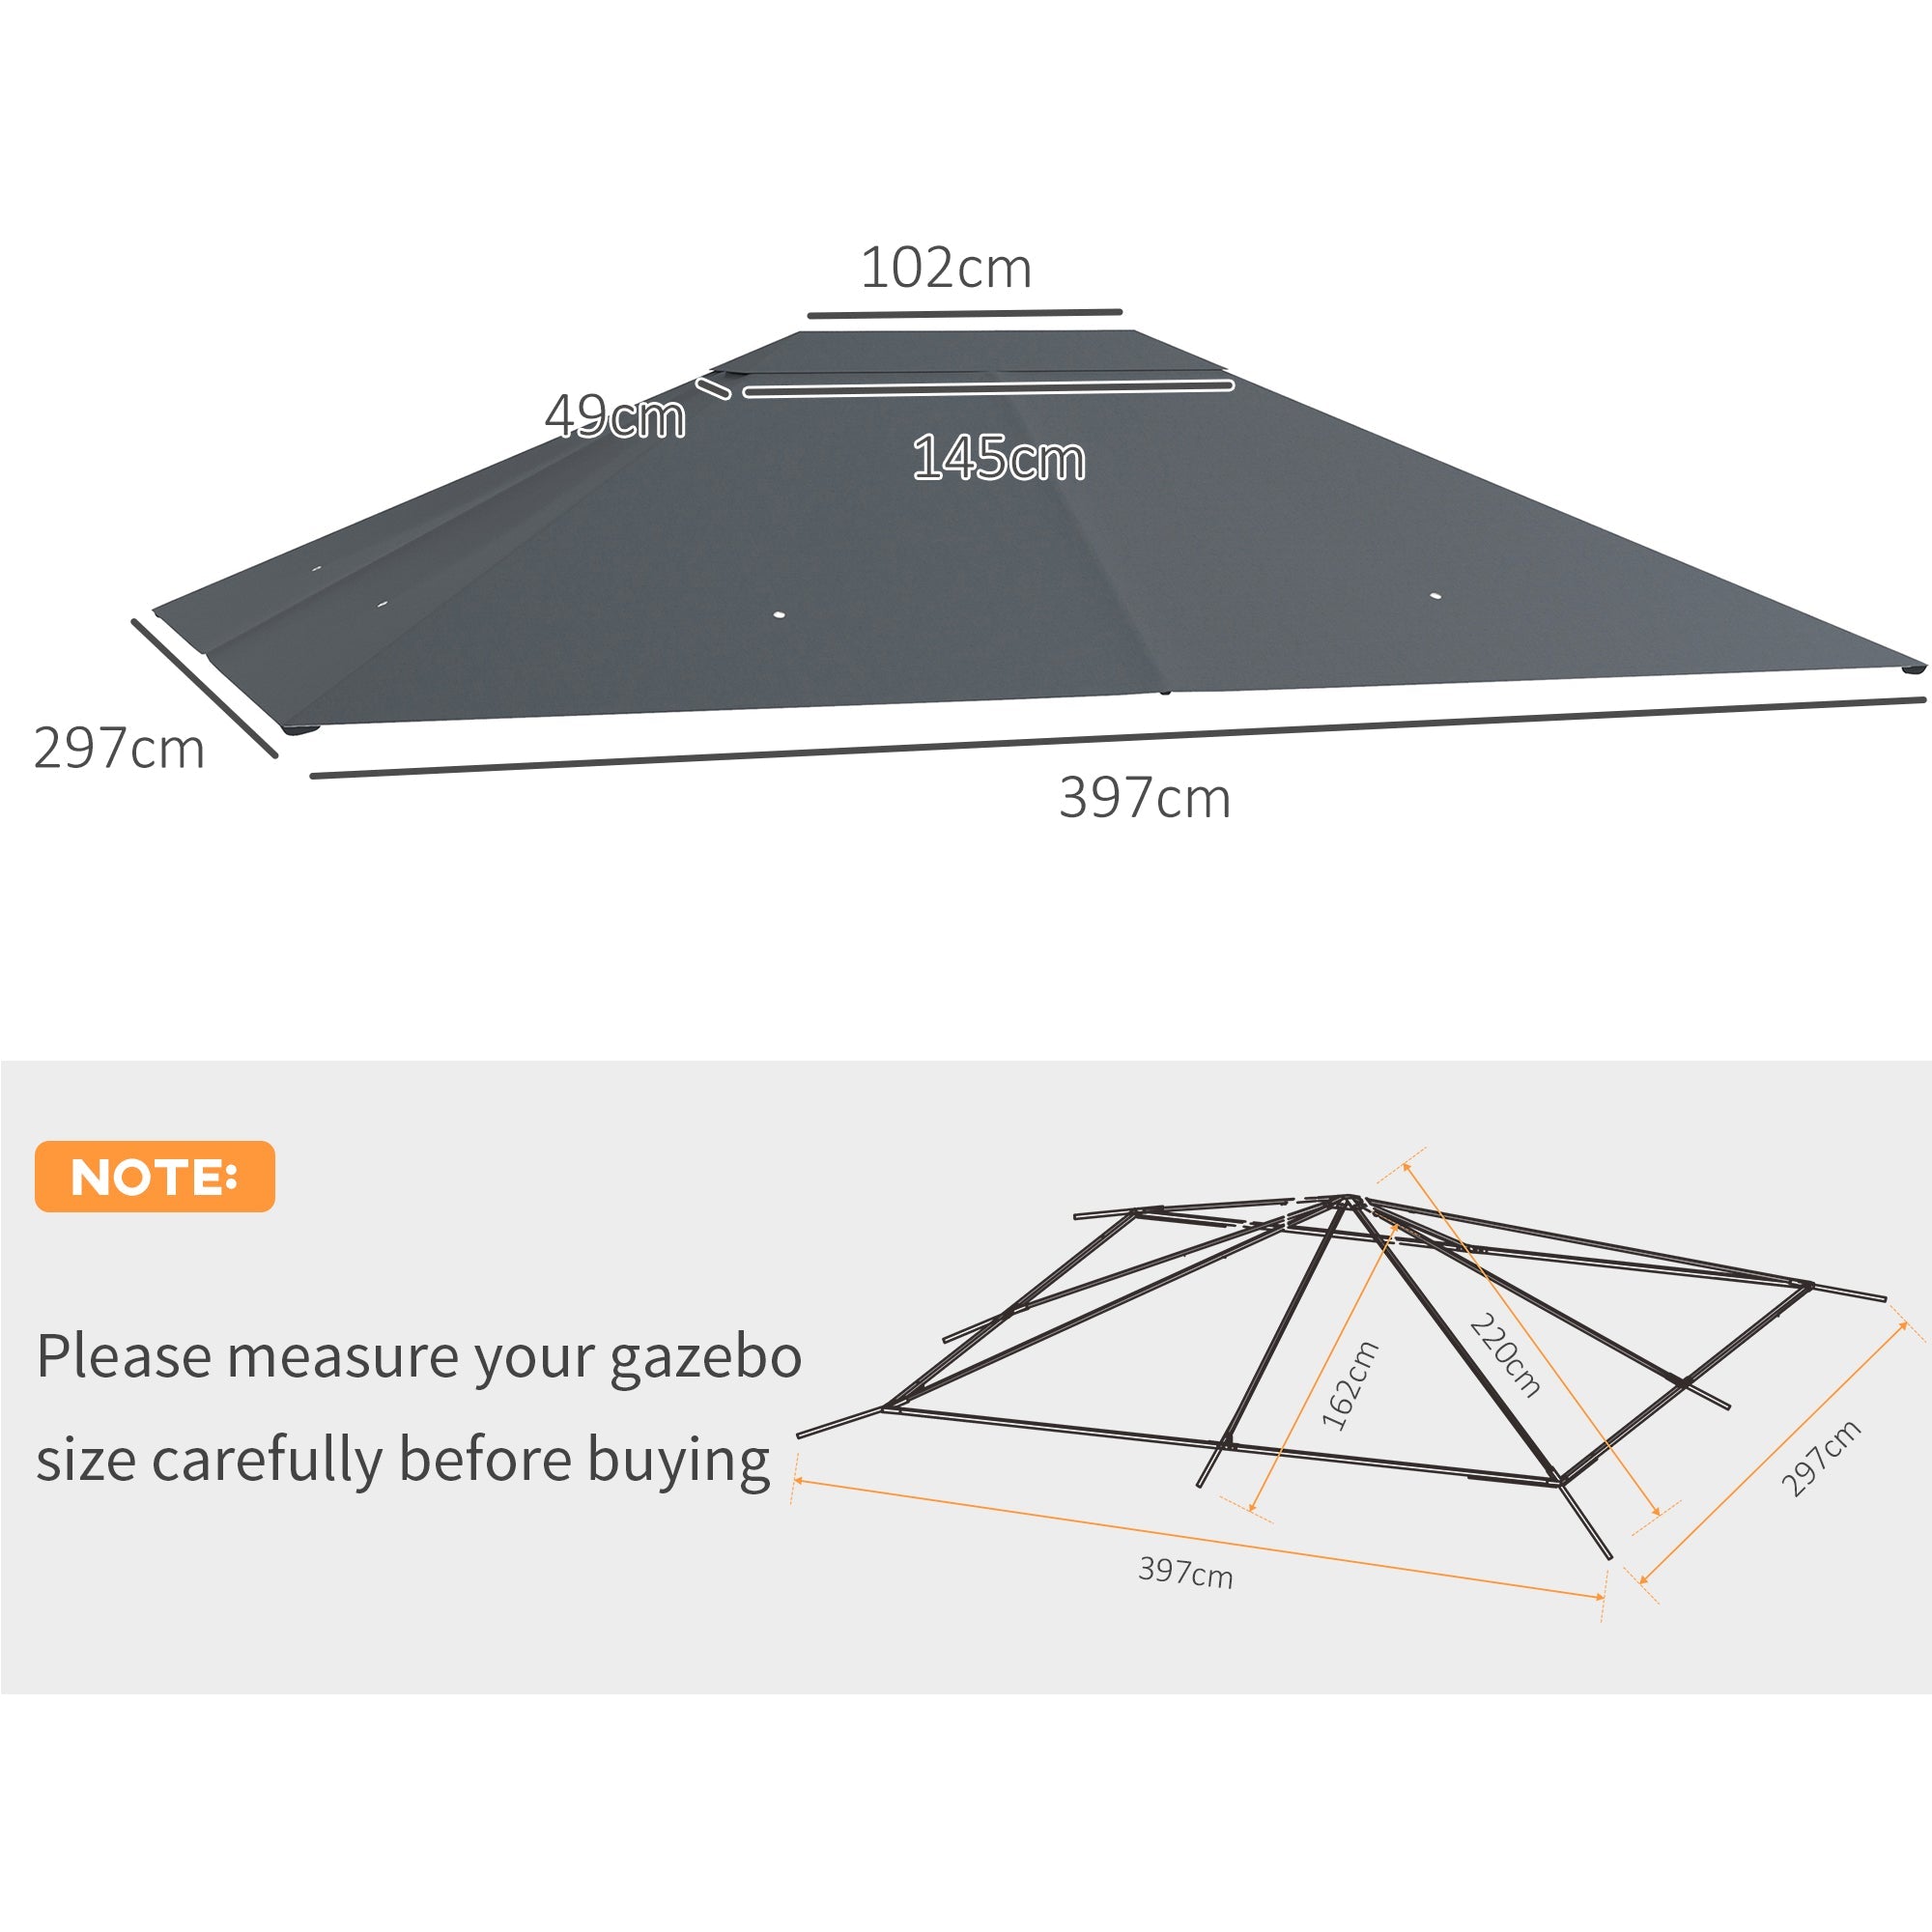 3 x 4m Gazebo Canopy Replacement Cover, Gazebo Roof Replacement (TOP COVER ONLY), Dark Grey-2